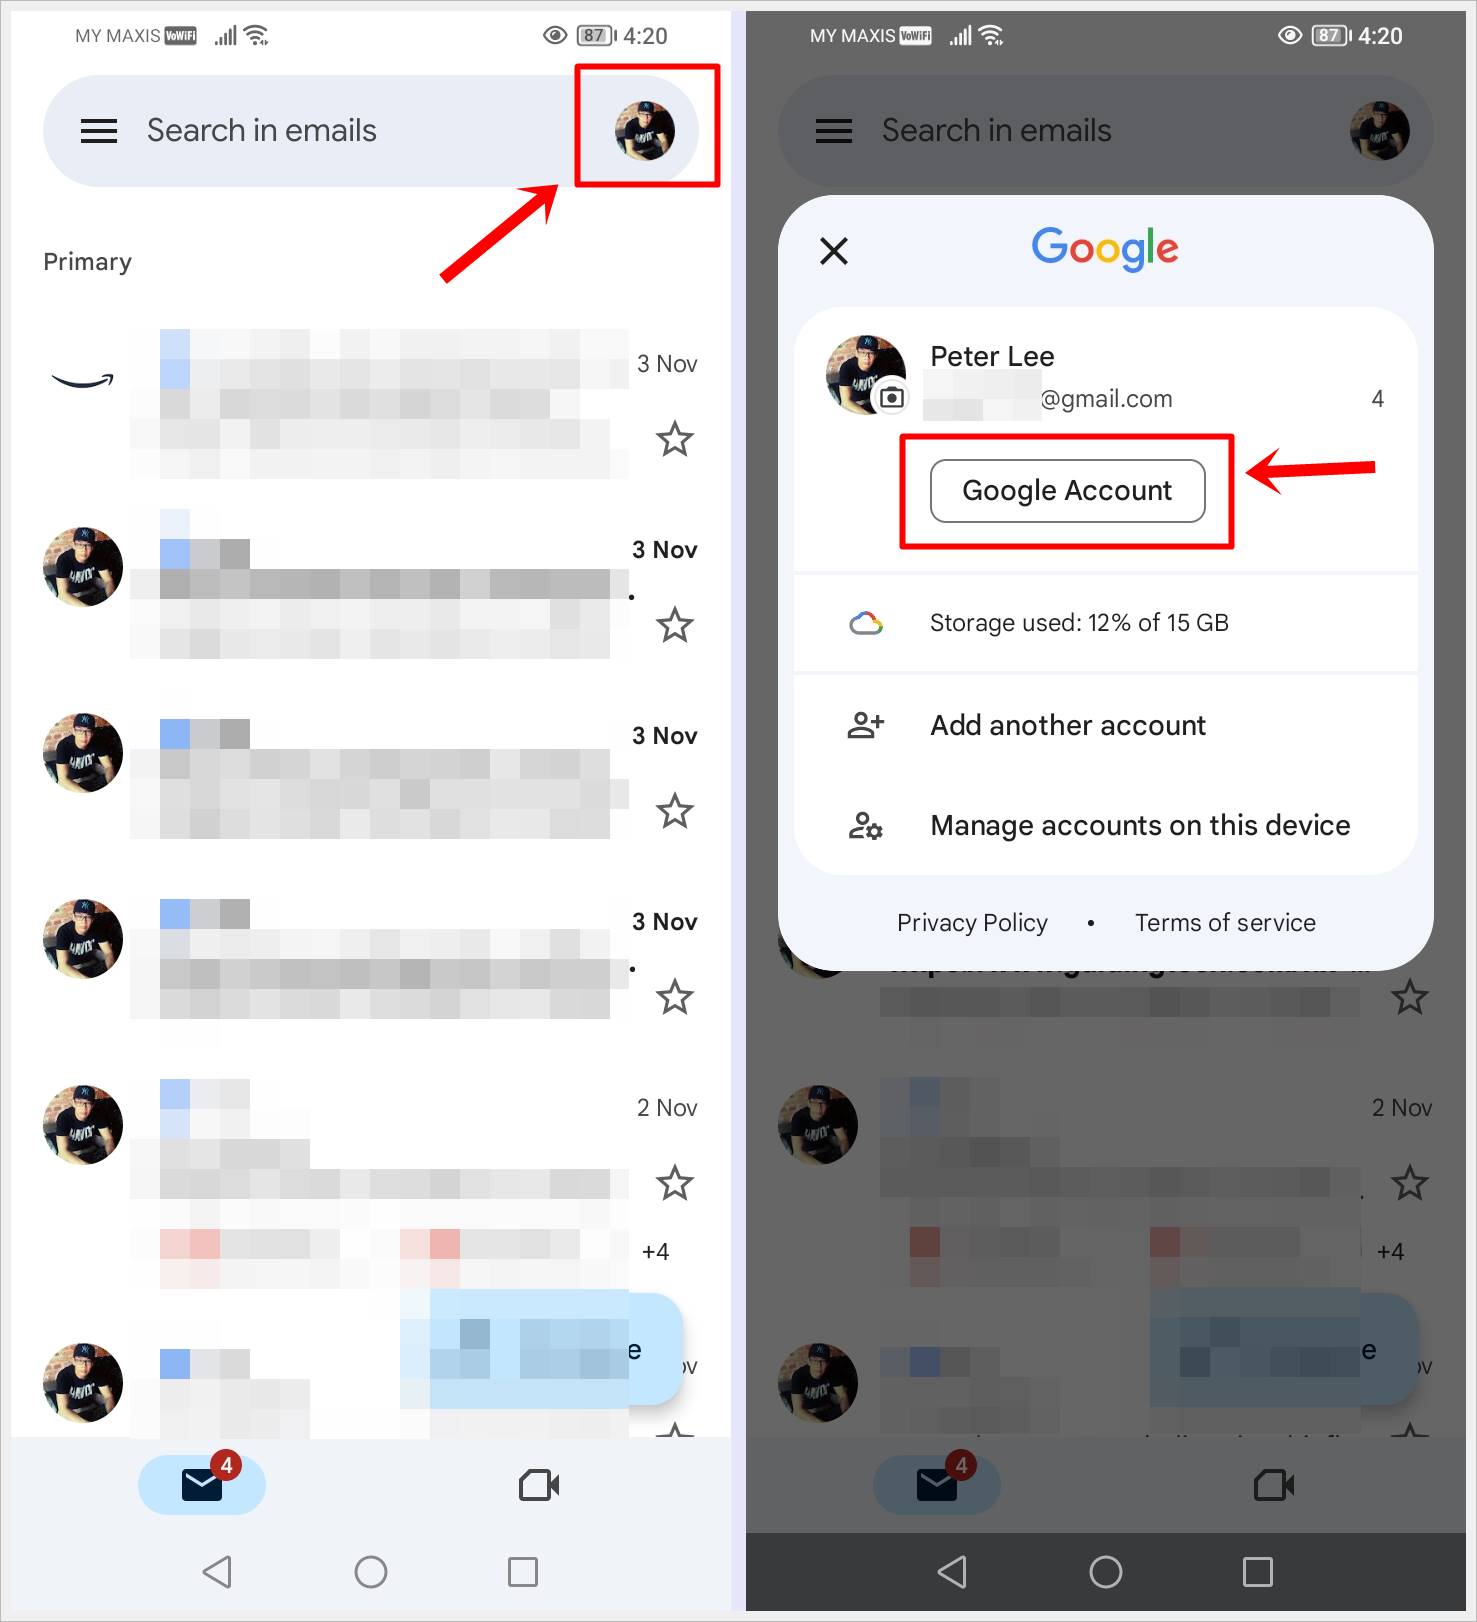 This image shows how to navigate to "Google Account" within the Gmail mobile app. The Profile Icon and the "Google Account" button are highlighted.